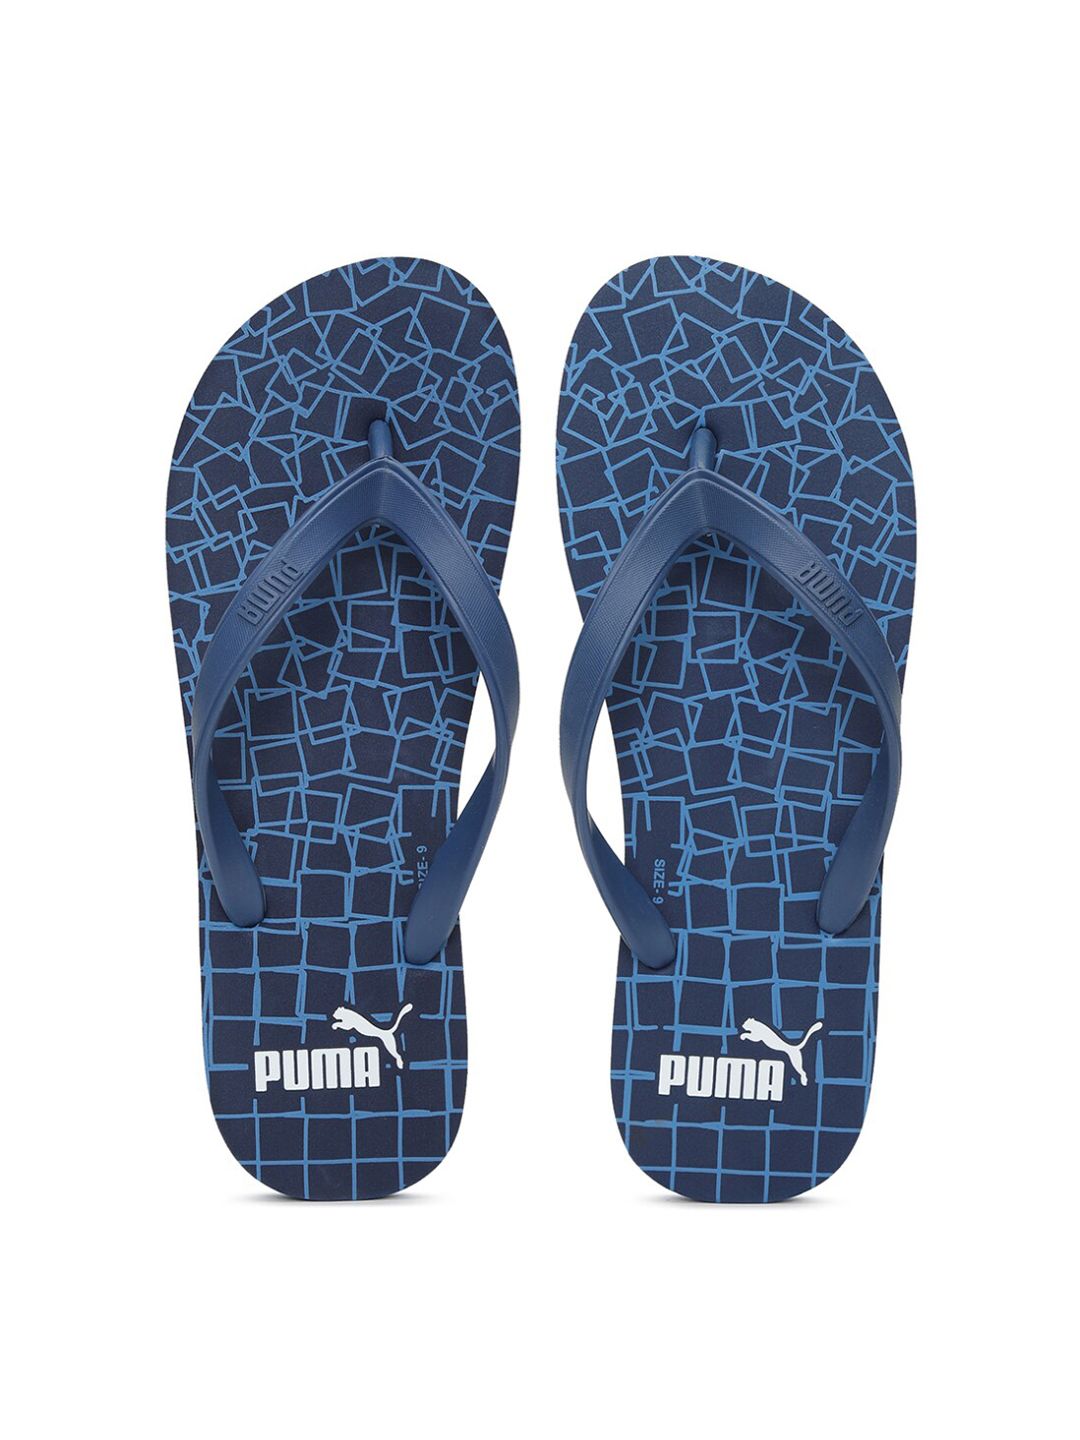 Puma Navy Blue Printed Thong Flip Flop Price in India